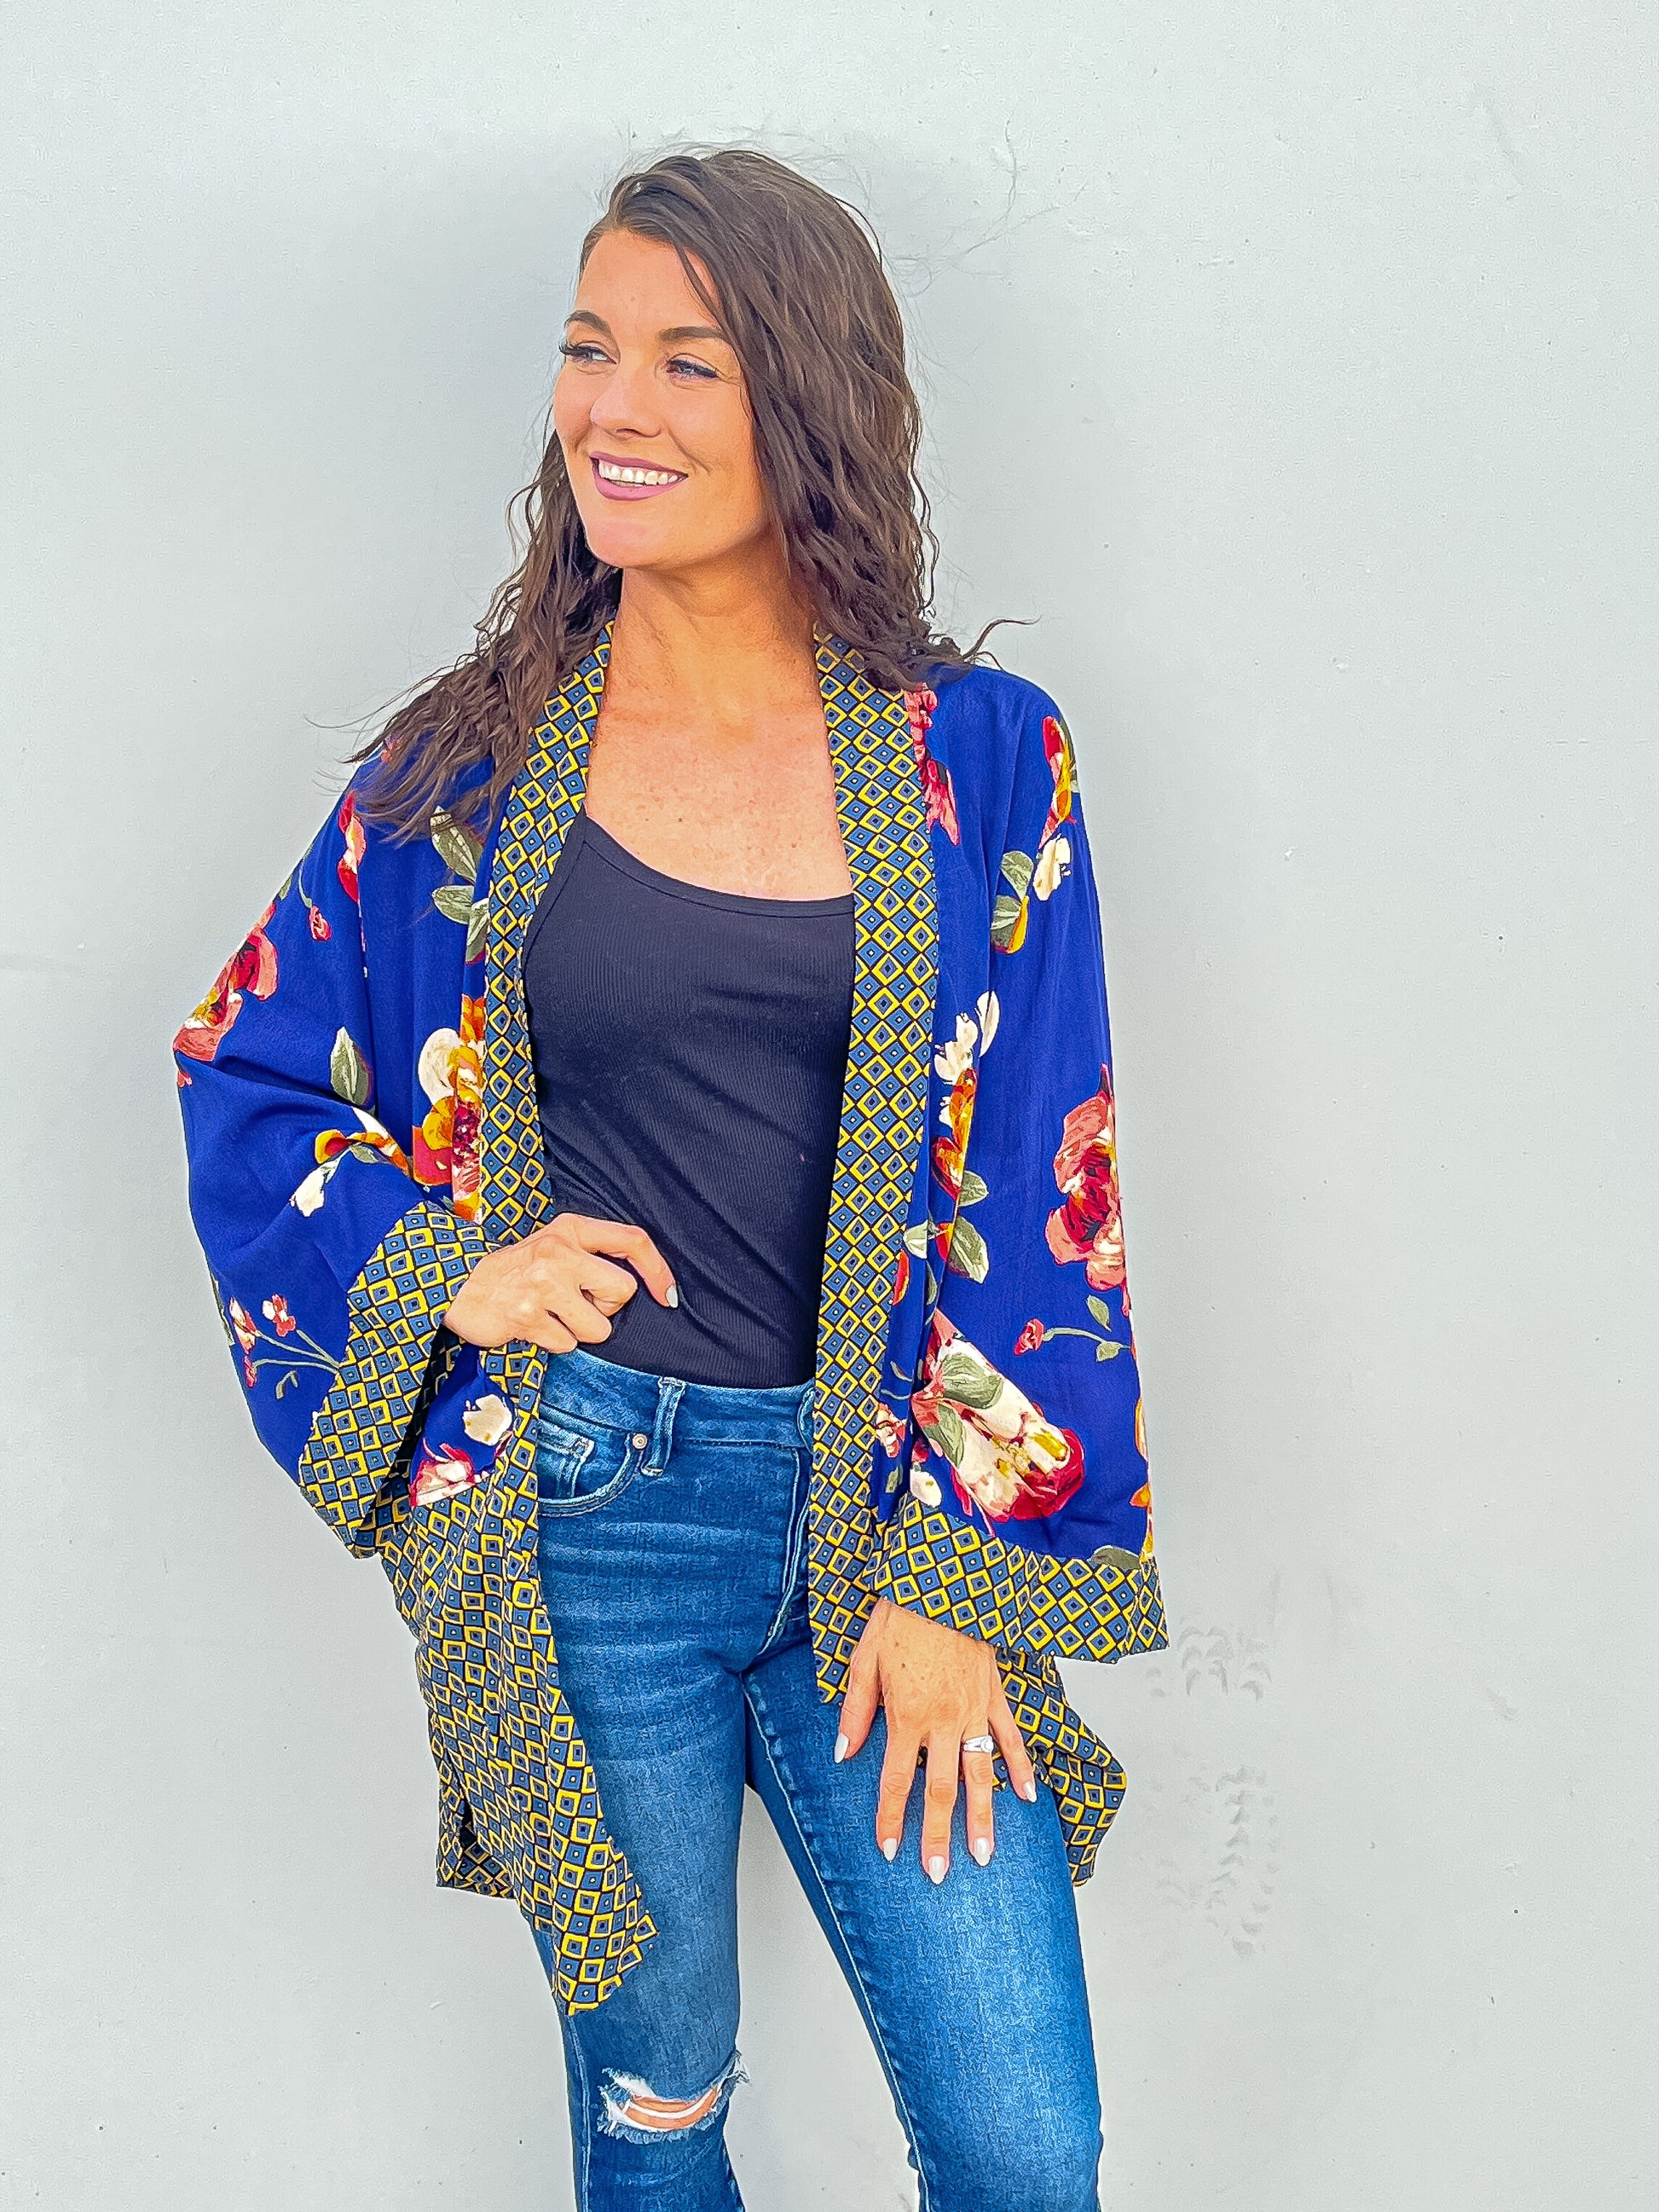 Royal blue colored kimono with floral accents and bell sleeves